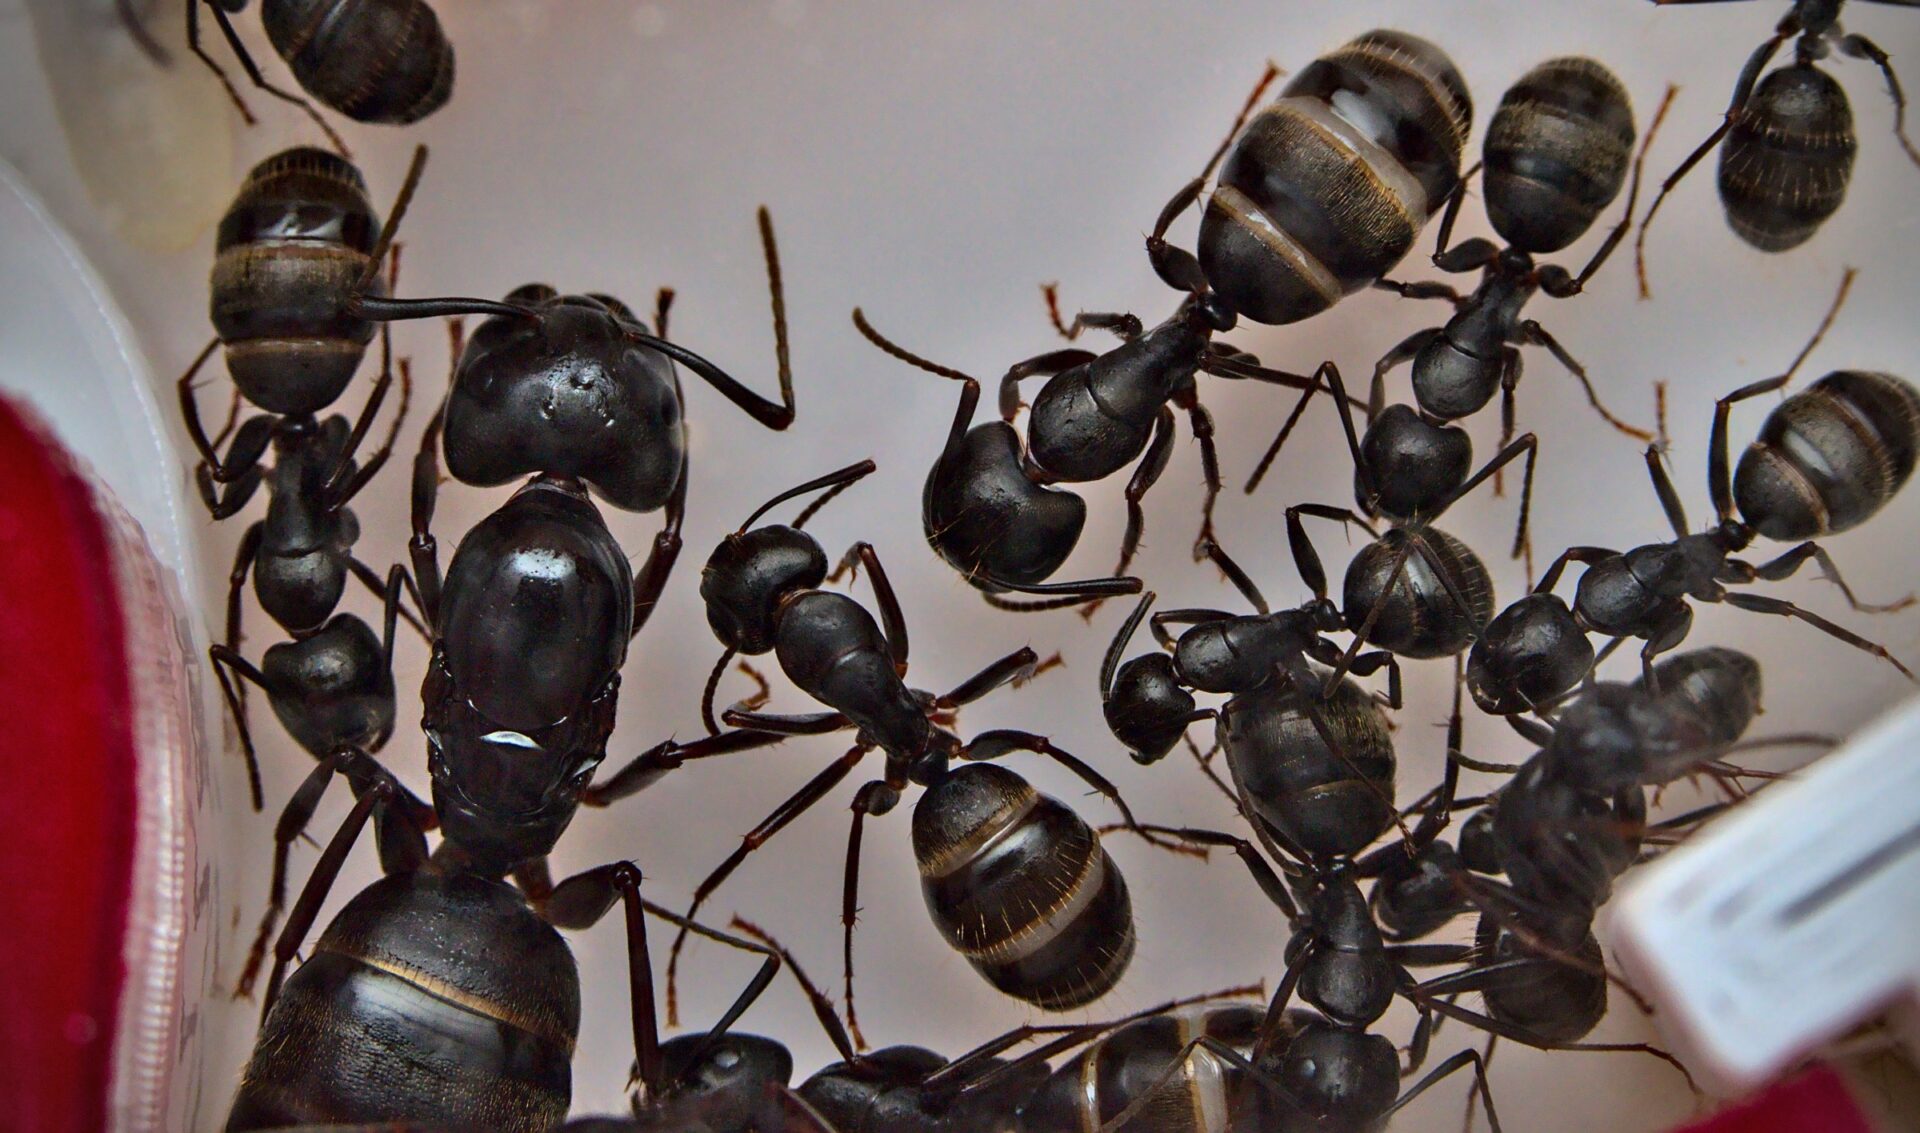 A Camponotus pennsylvanicus queen with her colony.